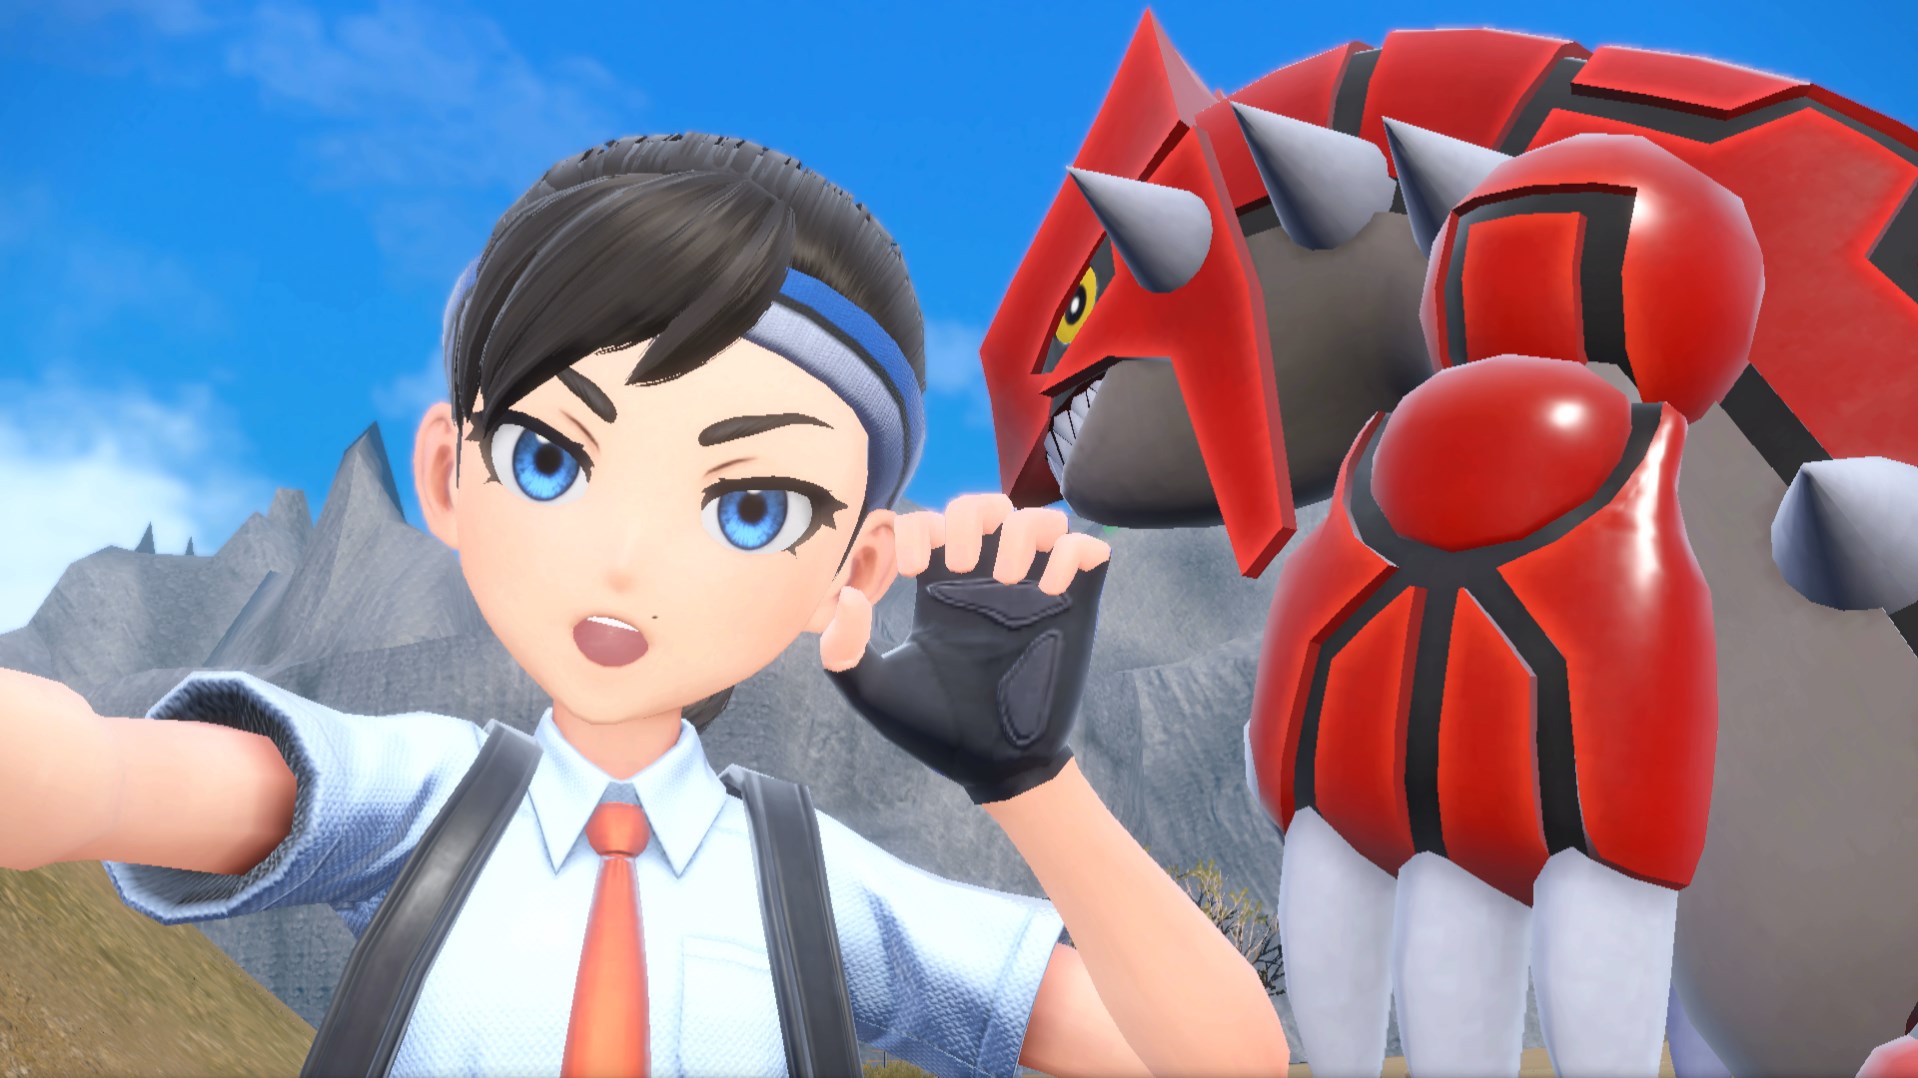 A Pokémon trainer from Scarlet and Violet poses with a Groudon in the background